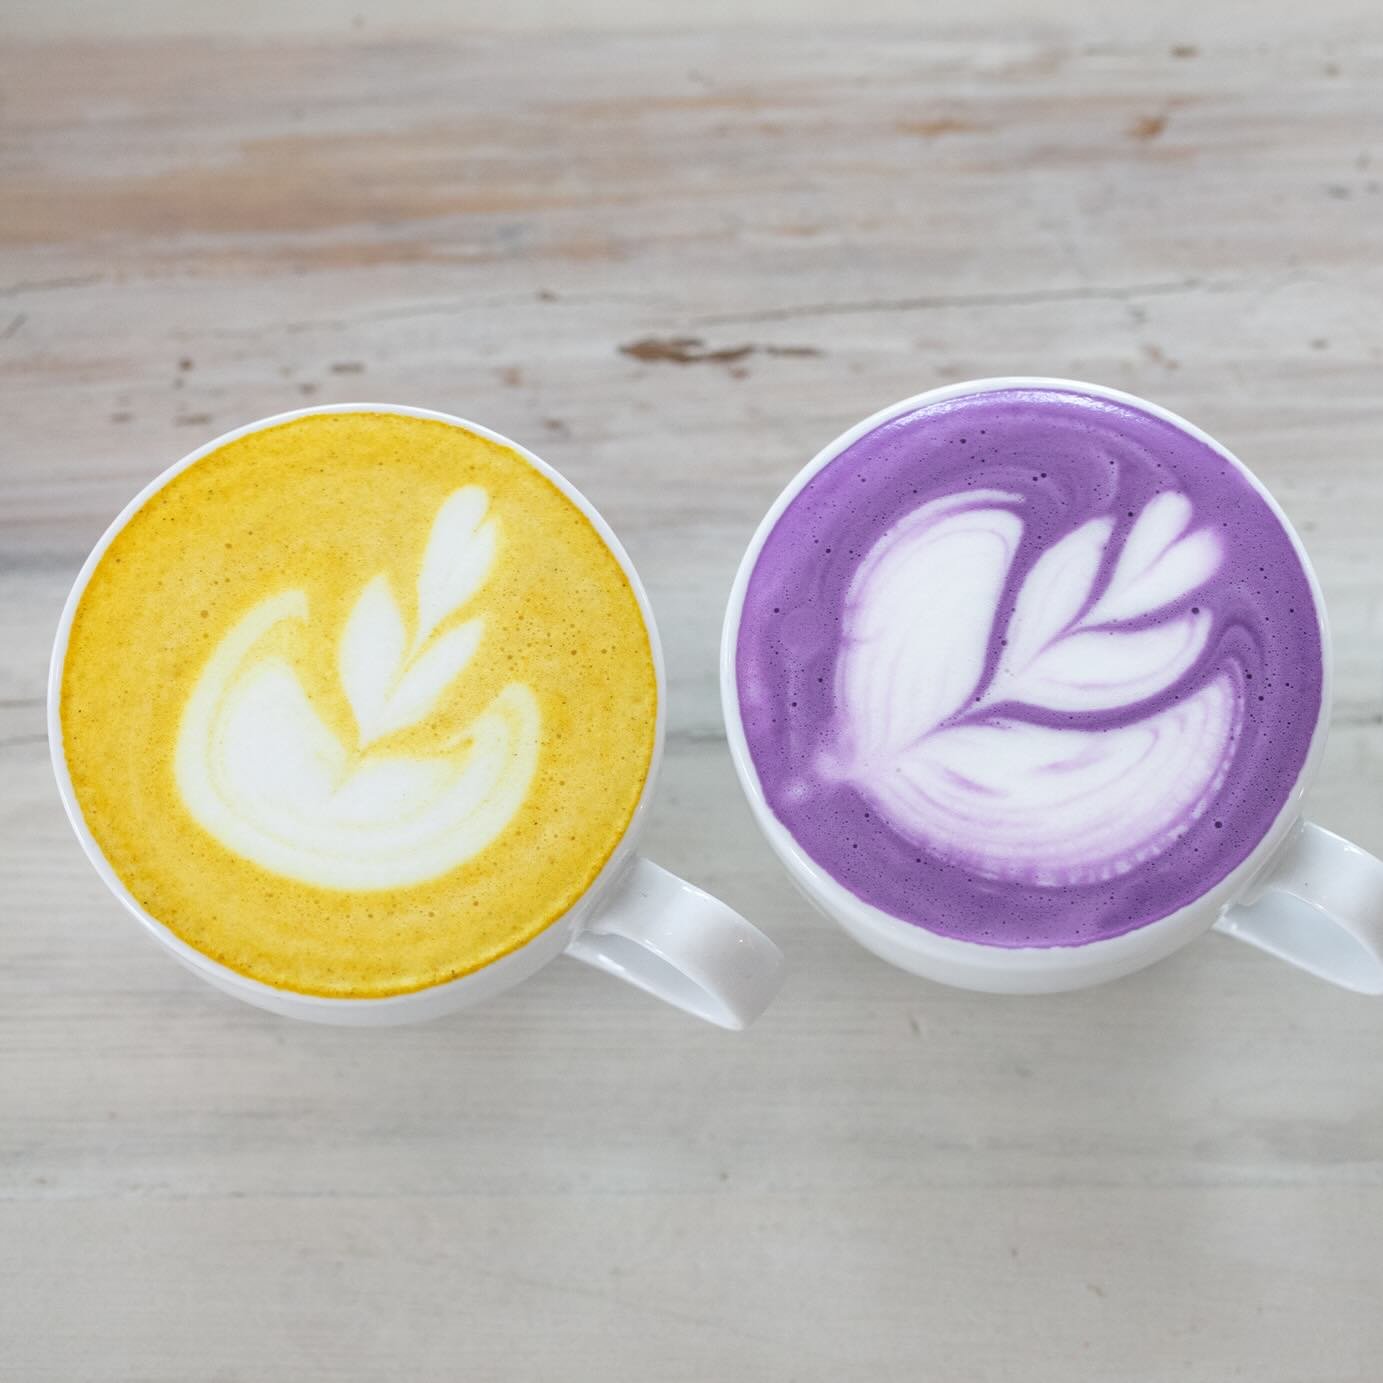 Today is the day our Sun and Moon align 🌕🌙

Experience today's solar eclipse with some our favorite drinks&mdash; the Sun Goddess, a golden latt&eacute; made with our housemade ginger turmeric syrup, and the Moon Goddess, made with our housemade ub